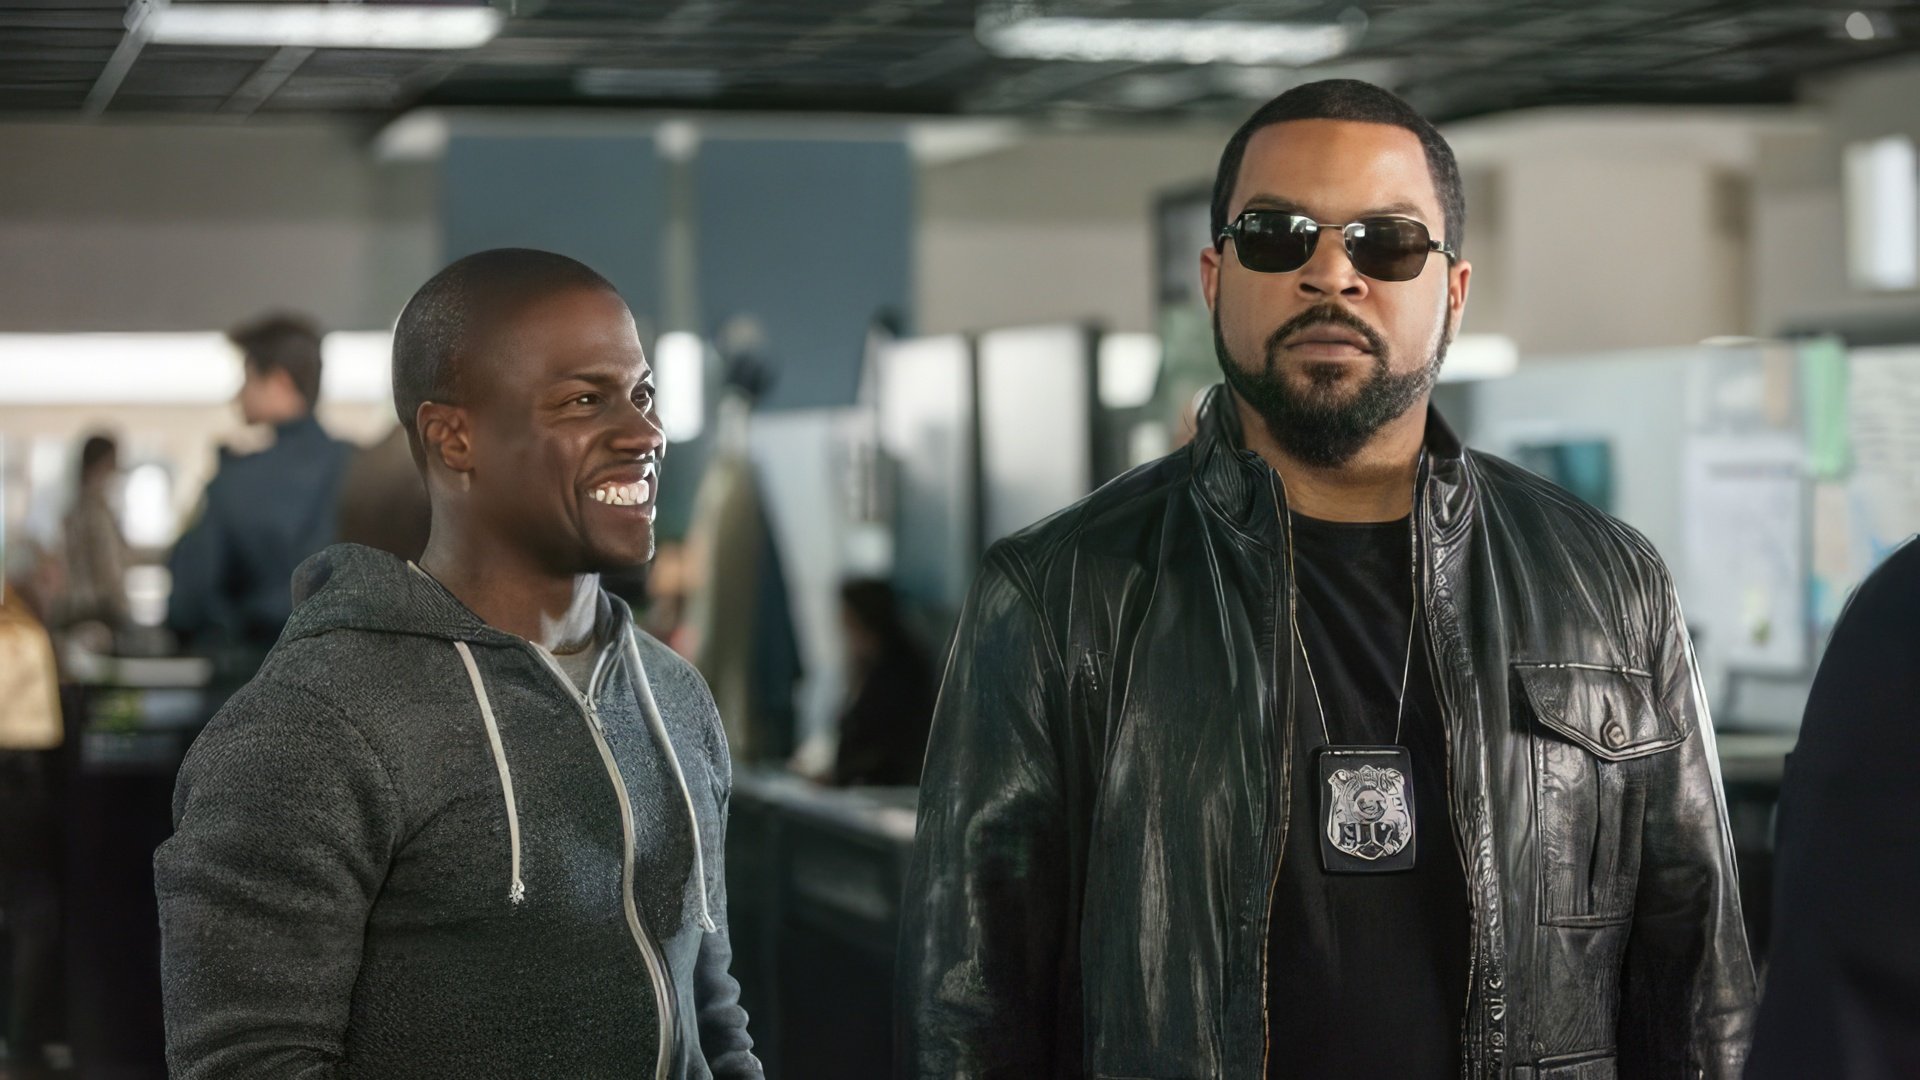 Kevin Hart and Ice Cube starred in the comedy Ride Along 2